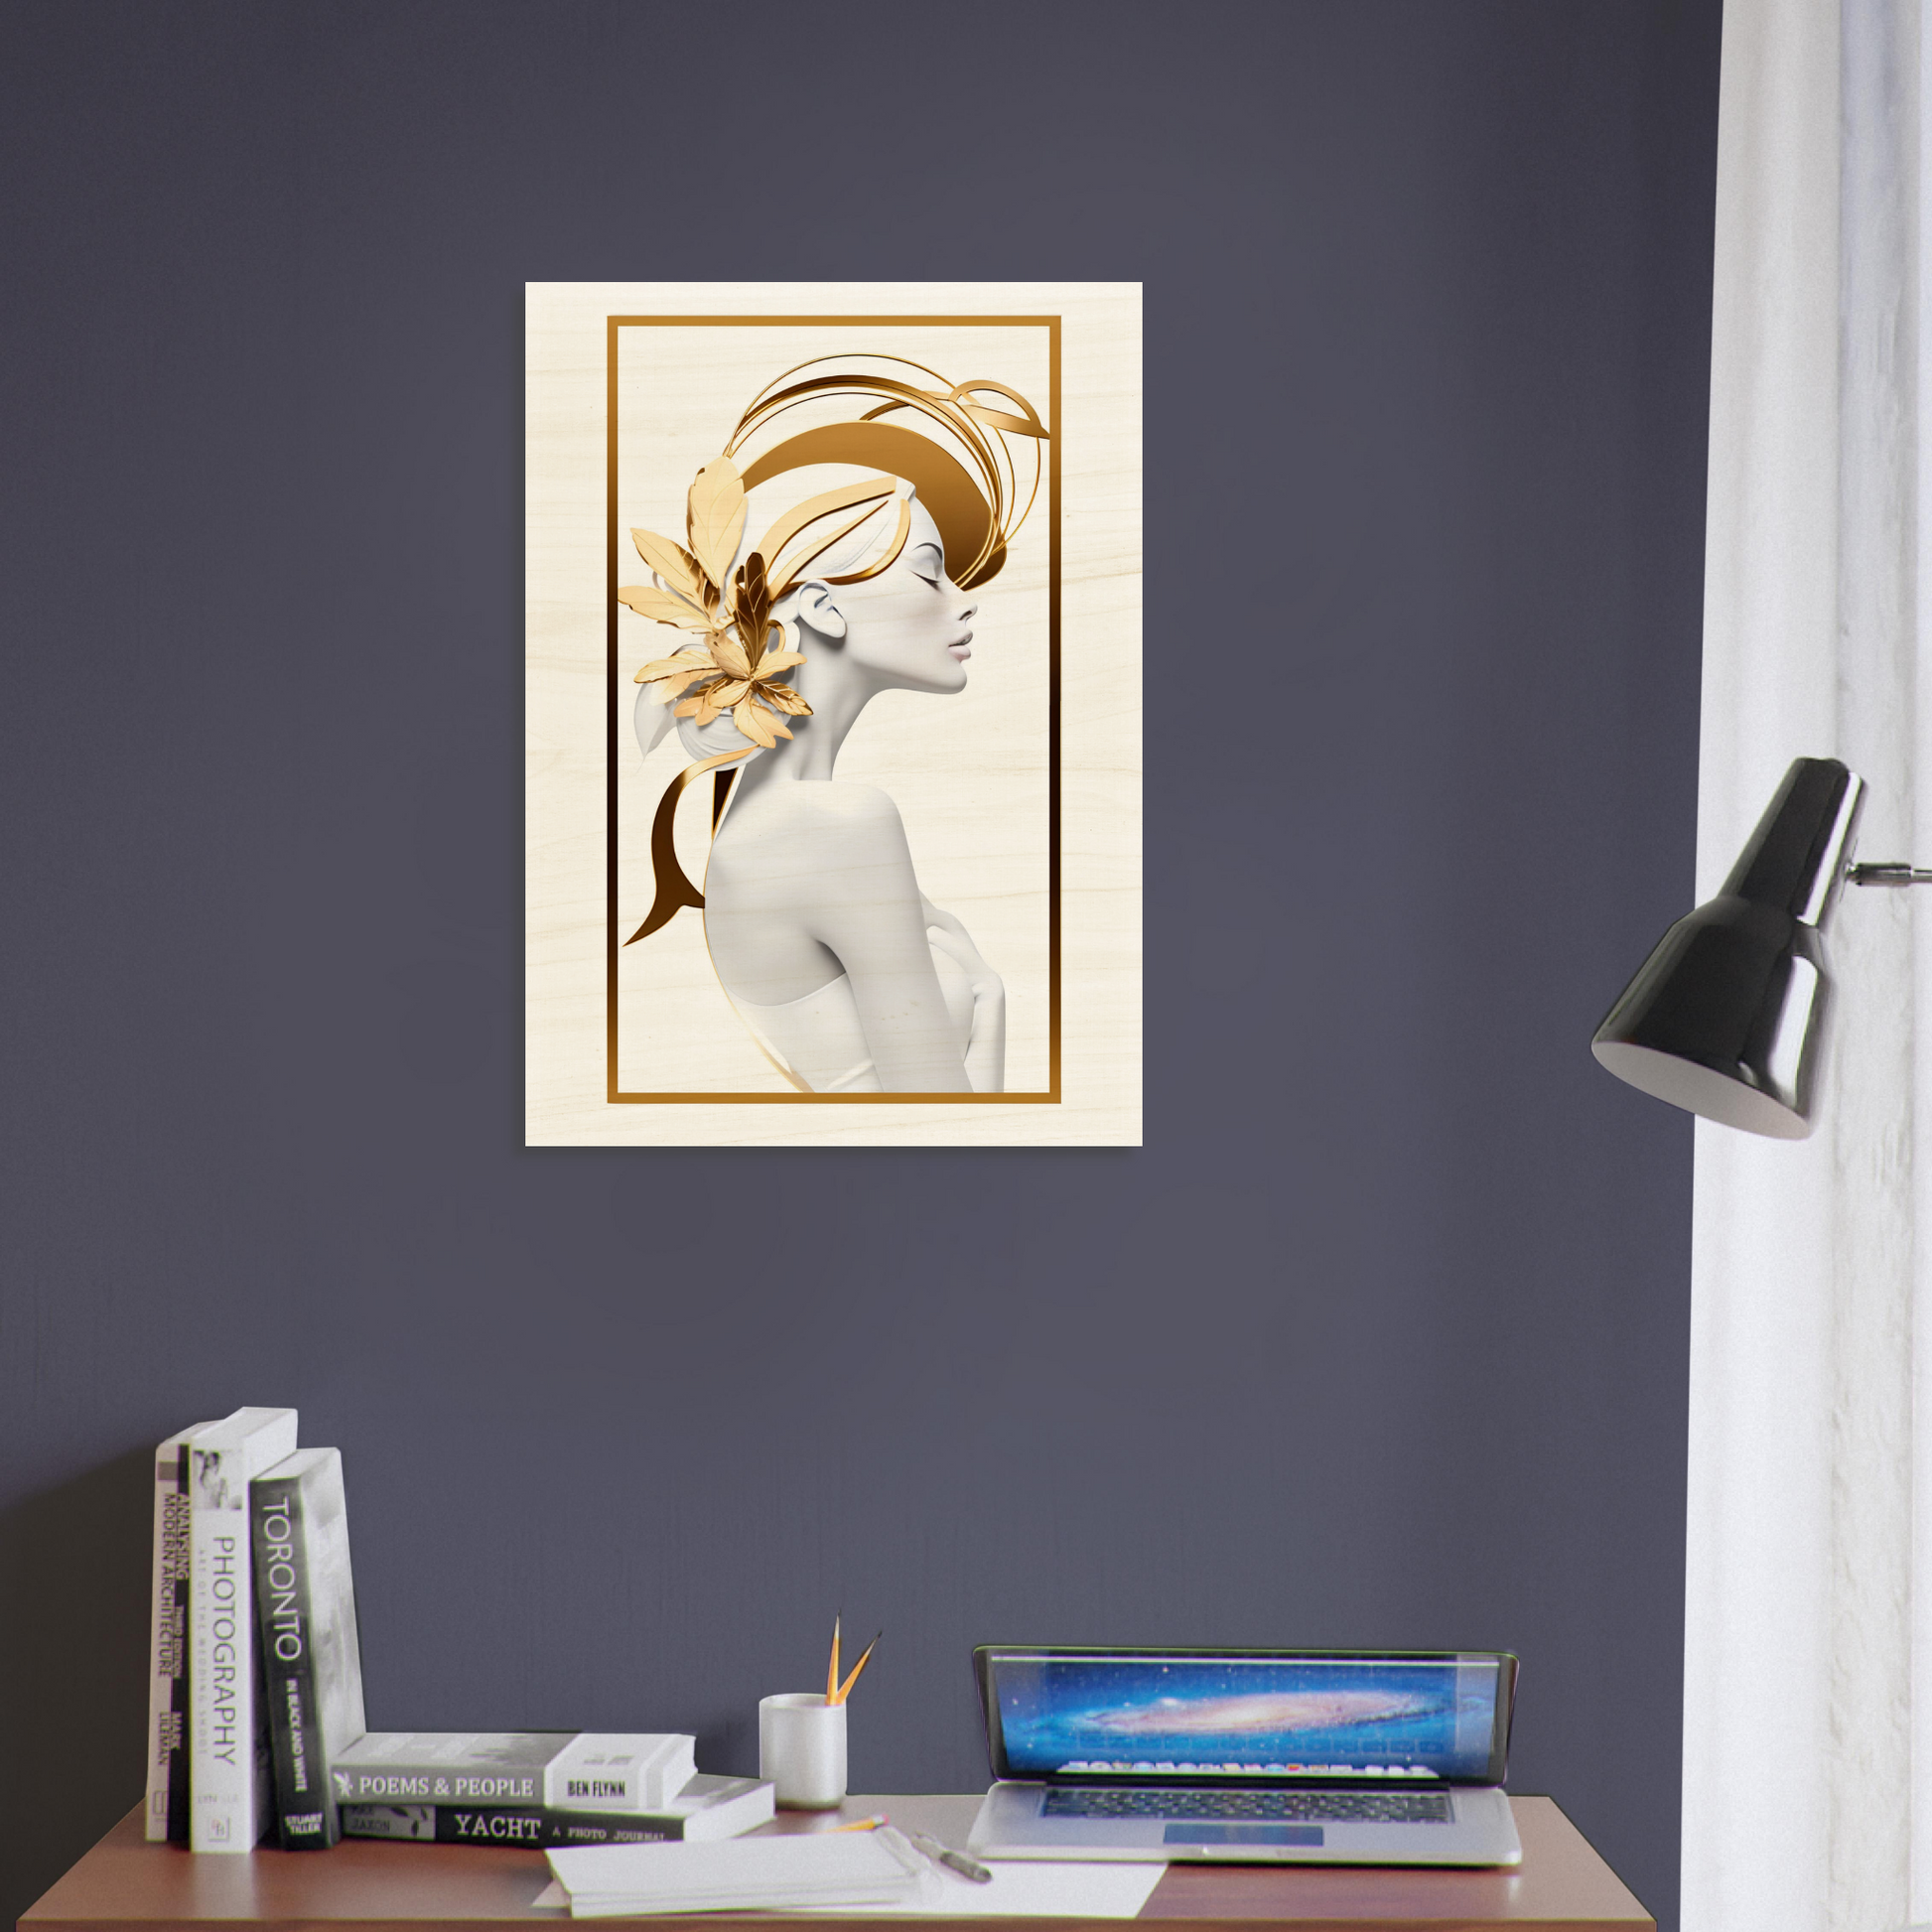 A high quality Art Deco Gold D - Wood Prints with a woman with gold hair and flowers for my wall.